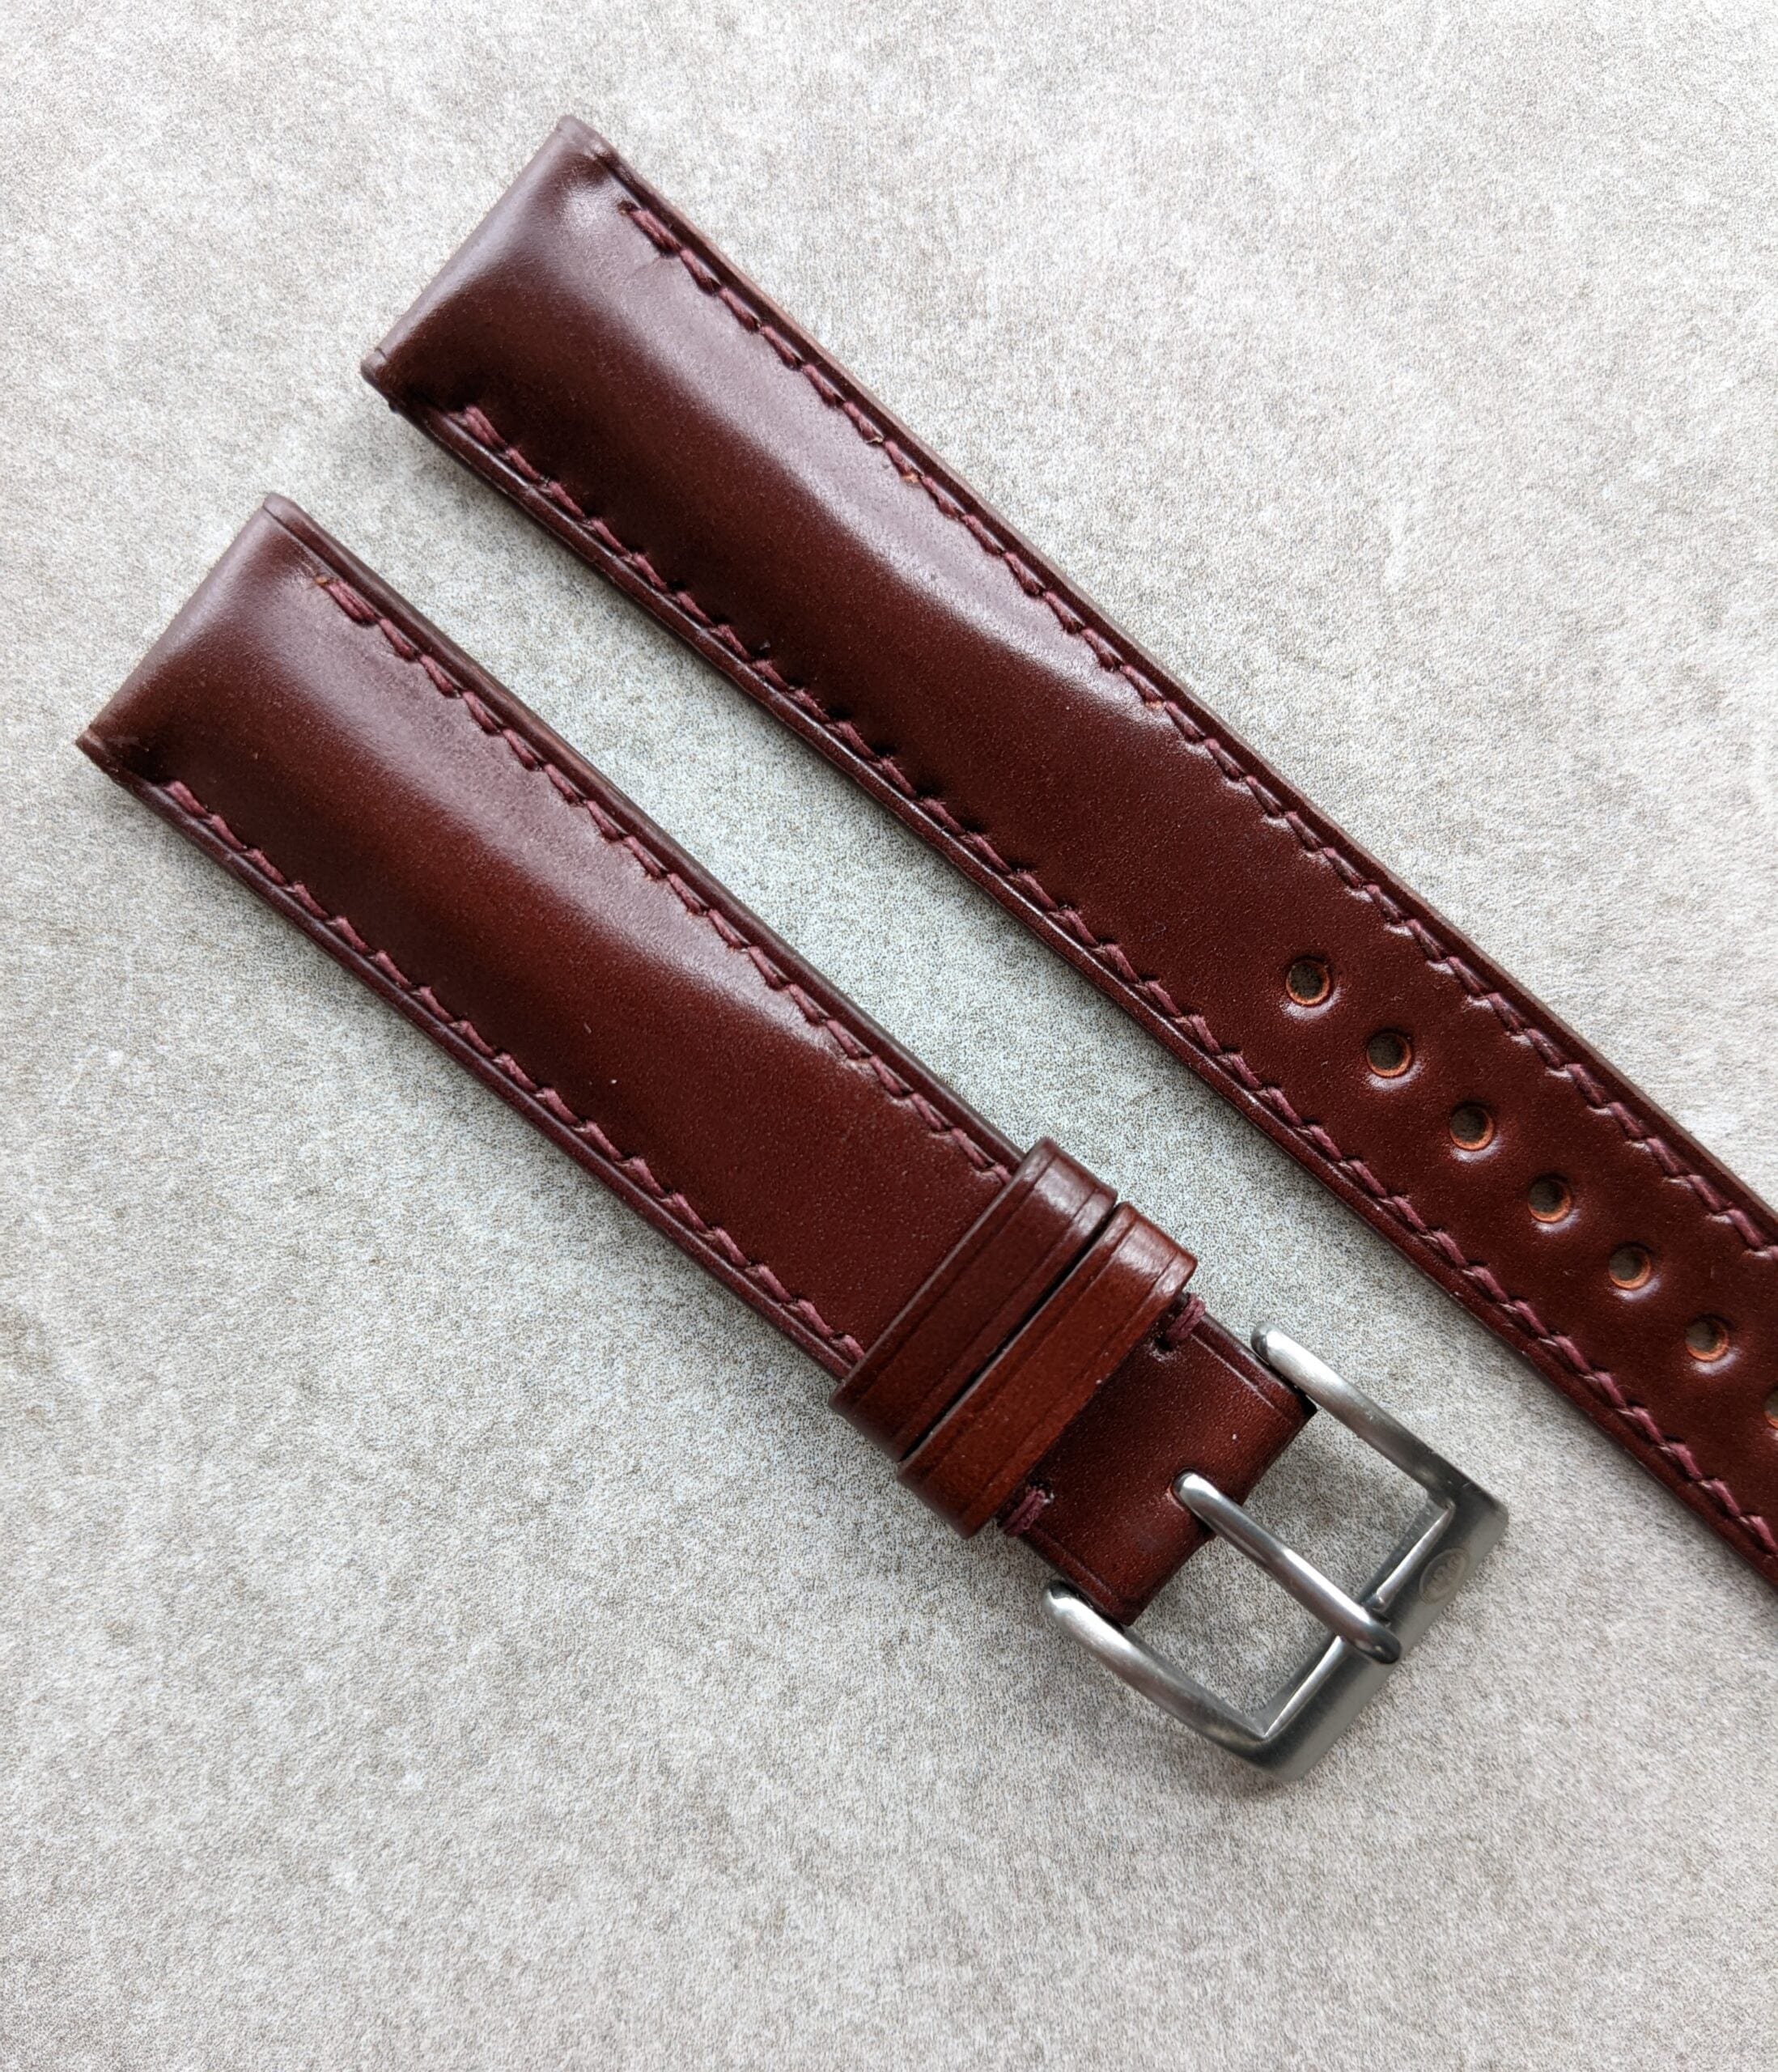 Shell Cordovan Watch Strap - Oxblood - The Strap Tailor